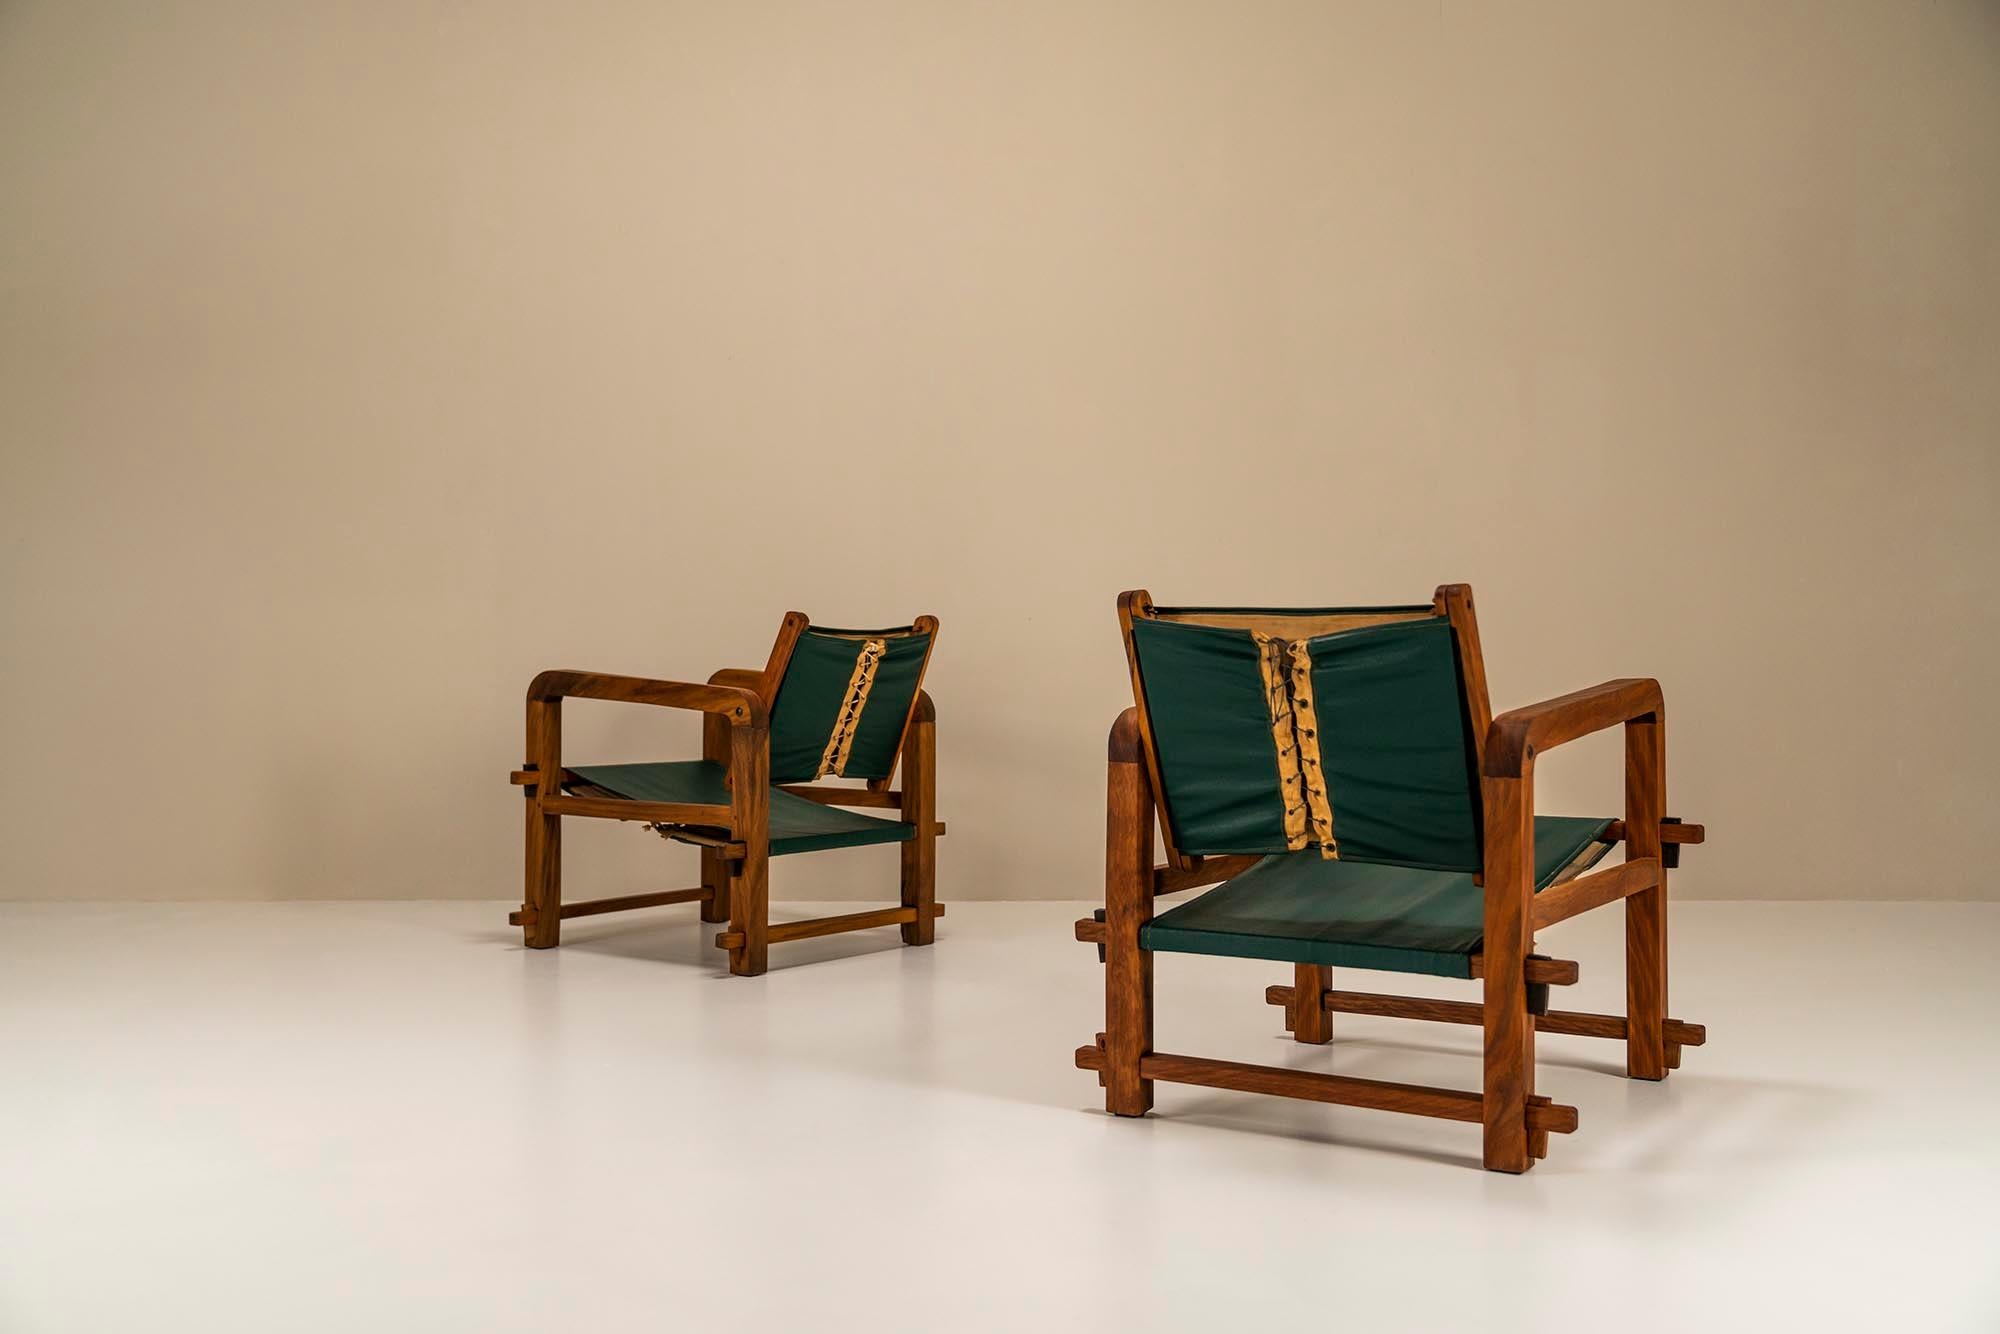 Brazilian Set Of Two Sling Chairs In Mahogany And Leather, Brazil 1960s